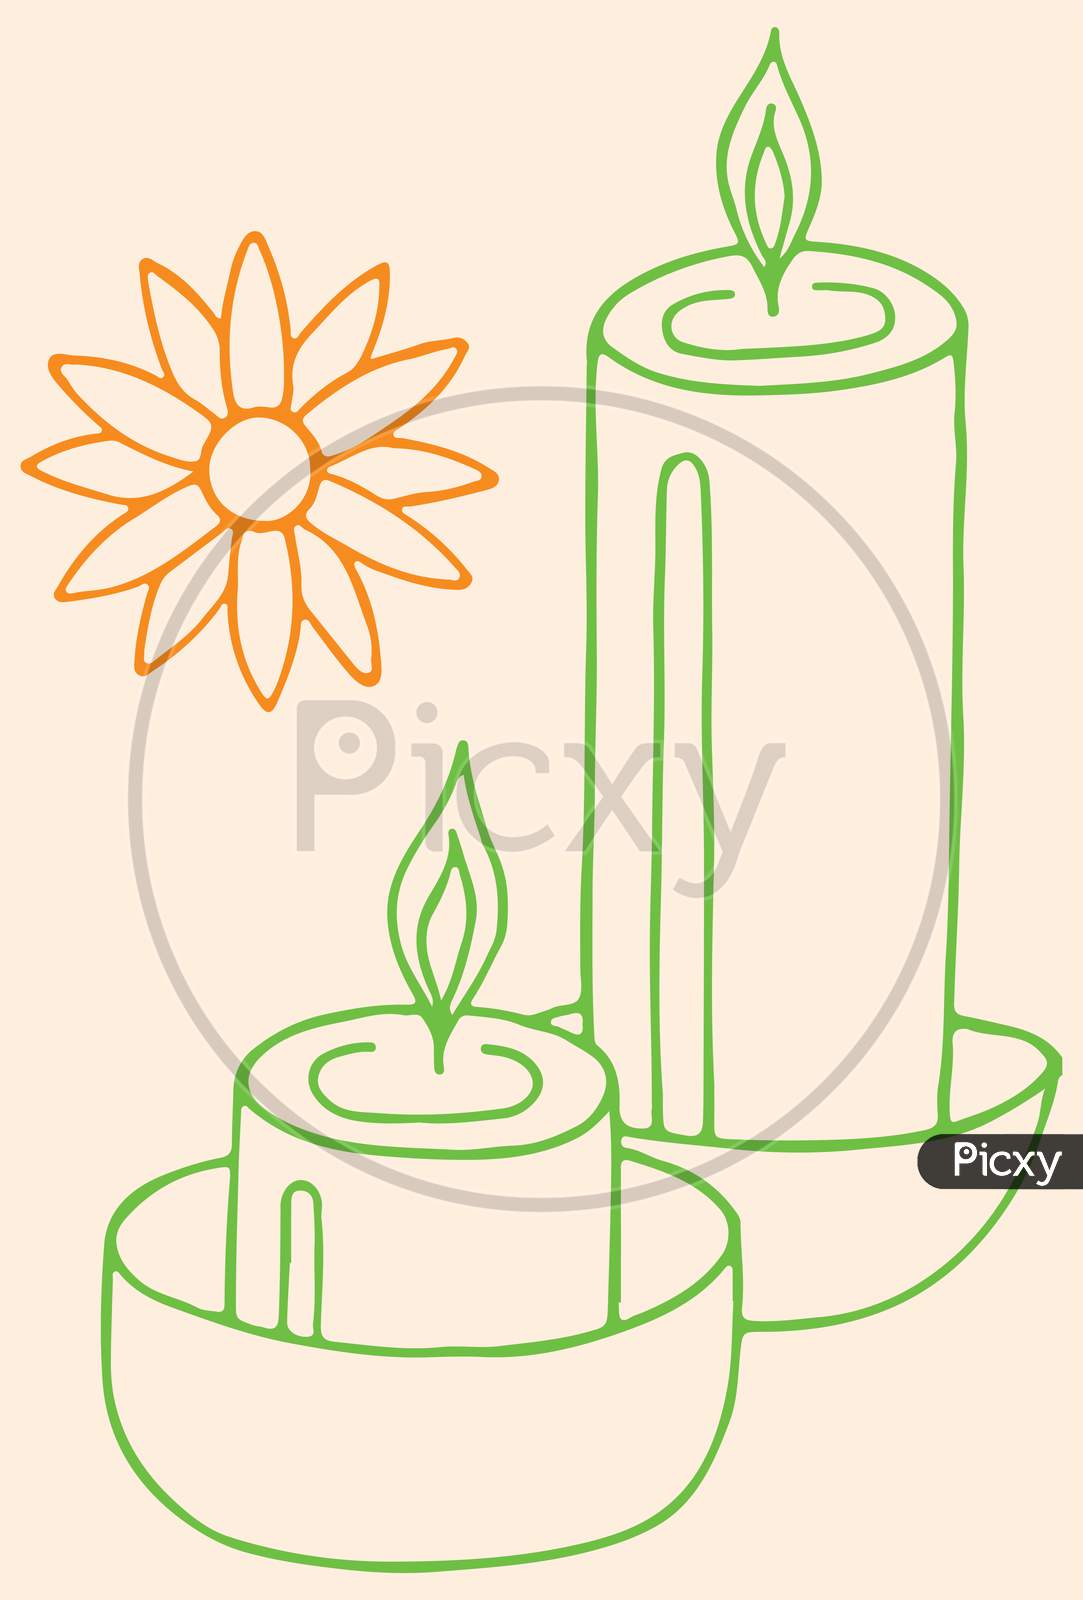 Drawing Of A Candle Burning Stock Illustrations RoyaltyFree Vector  Graphics  Clip Art  iStock